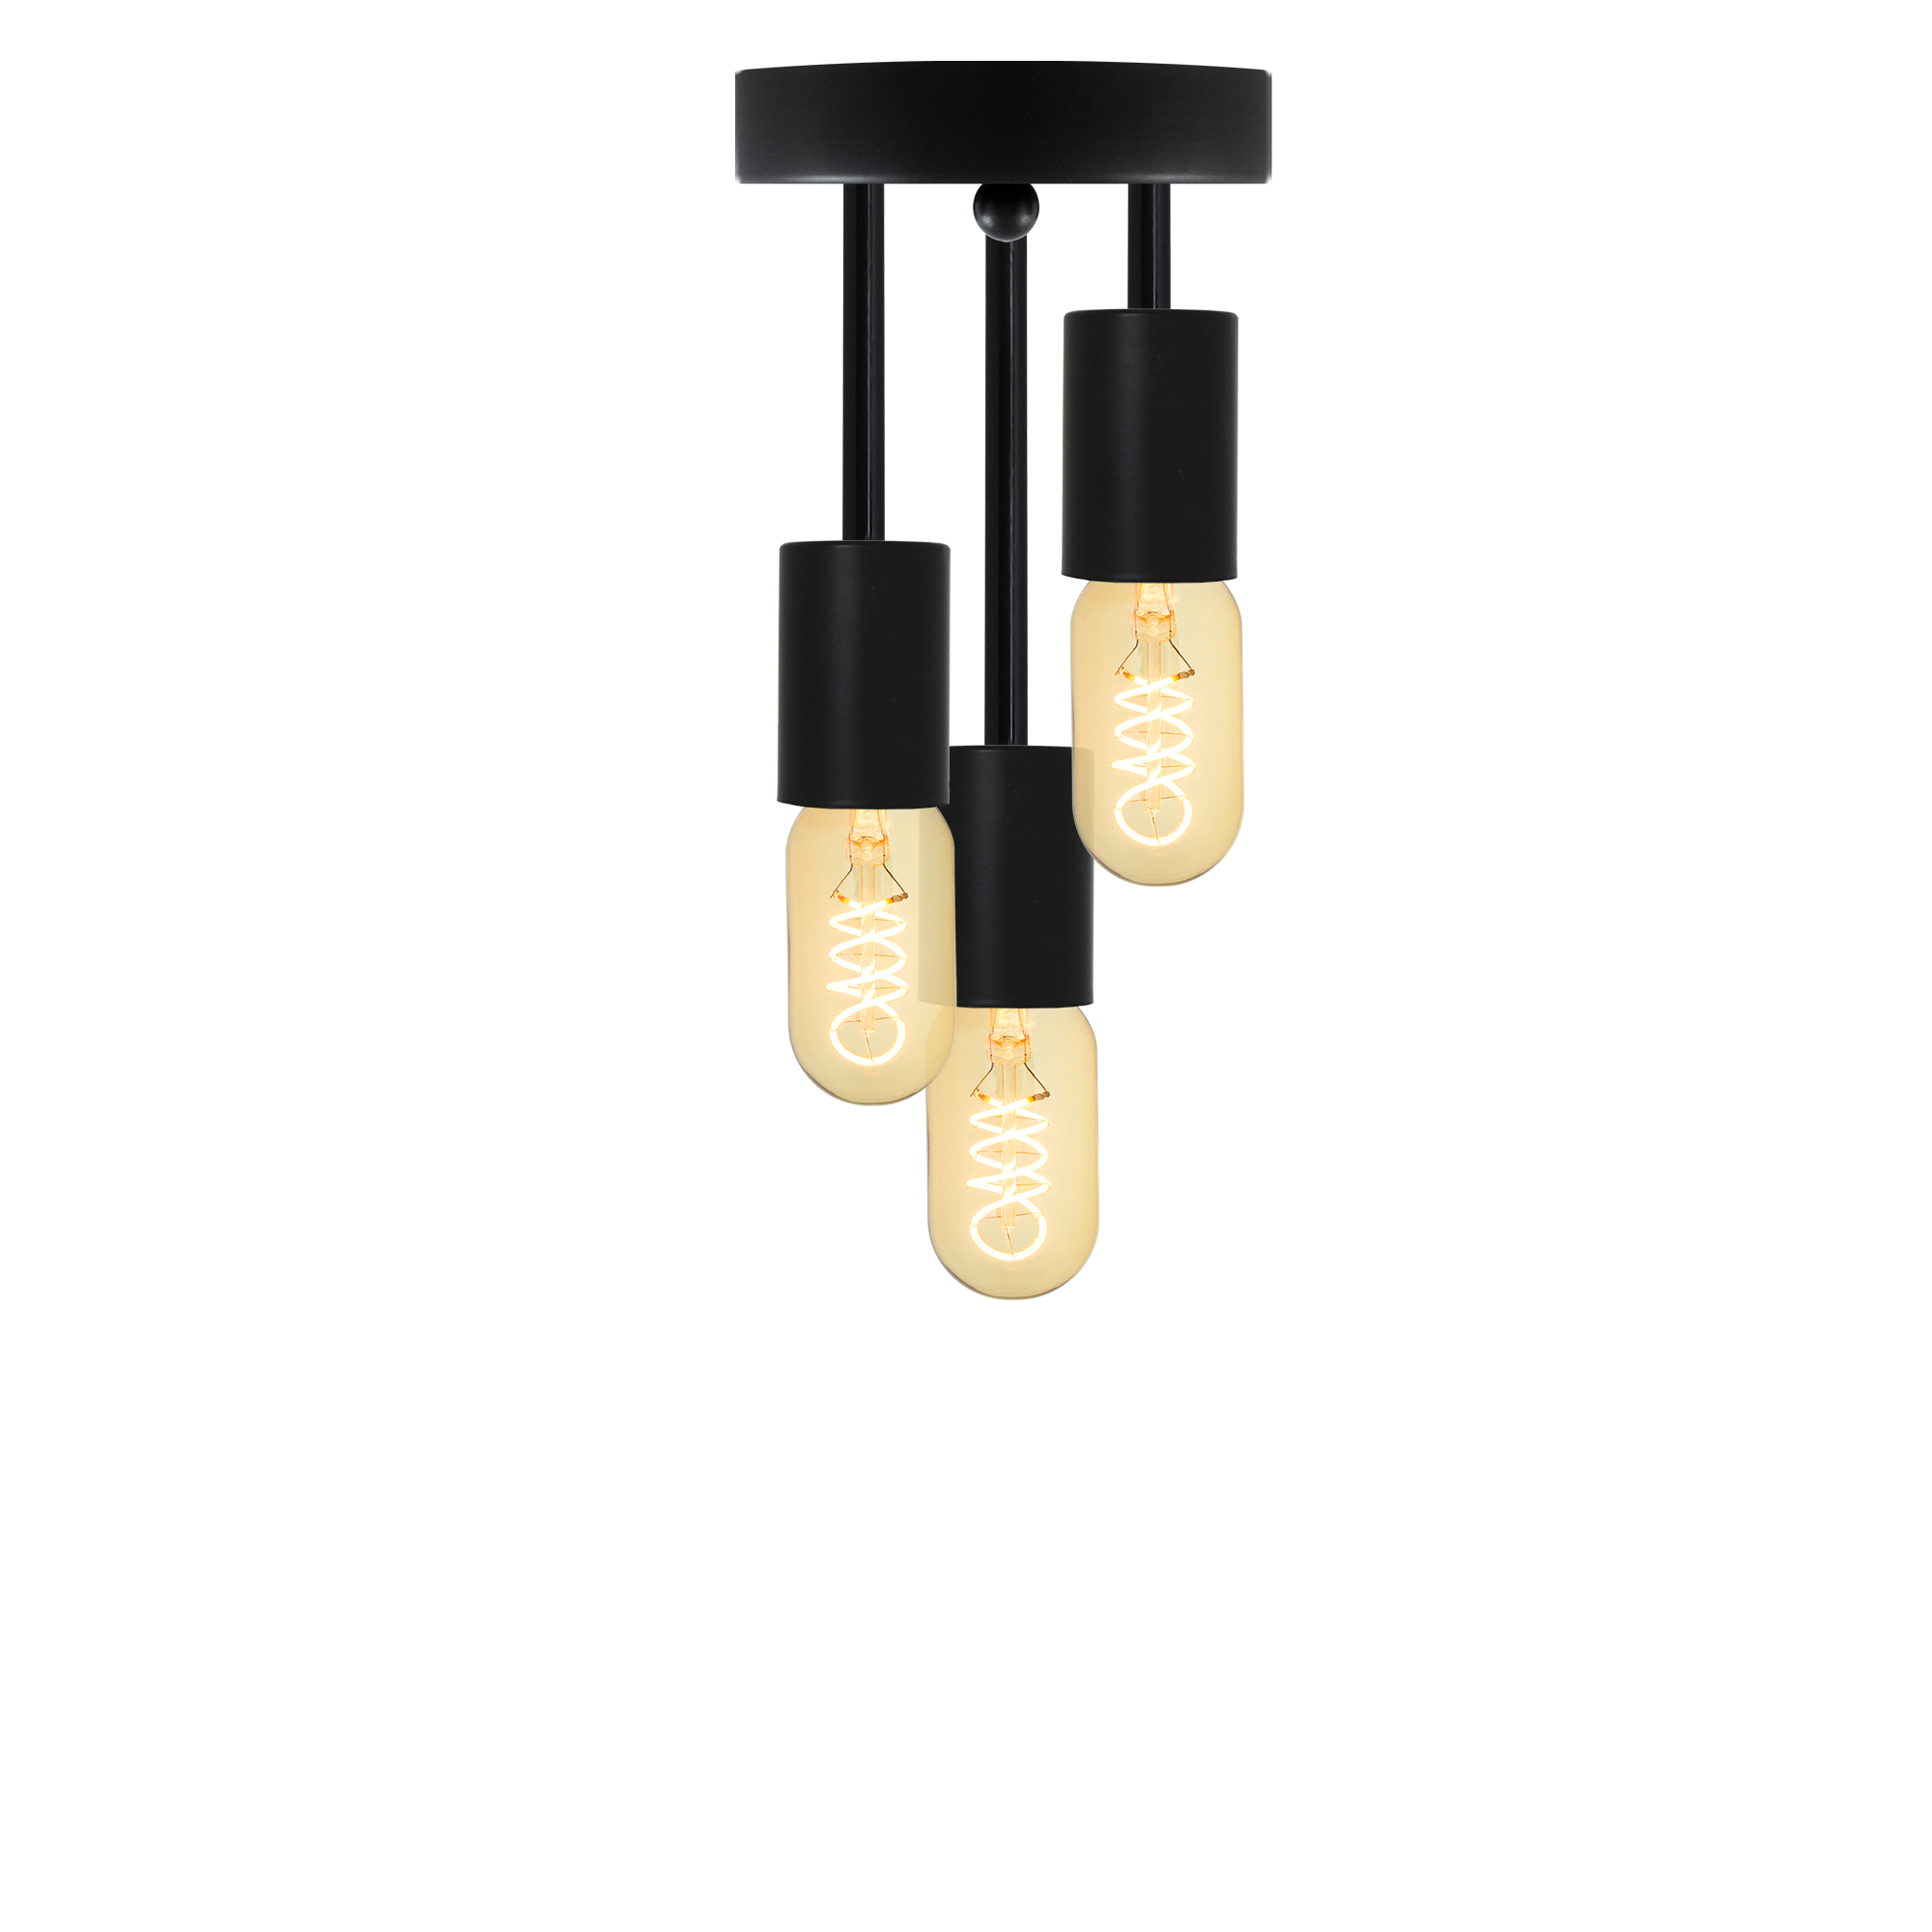 Semi-flush mount light fixture with a black base and three hanging bulbs with matching black fixtures.